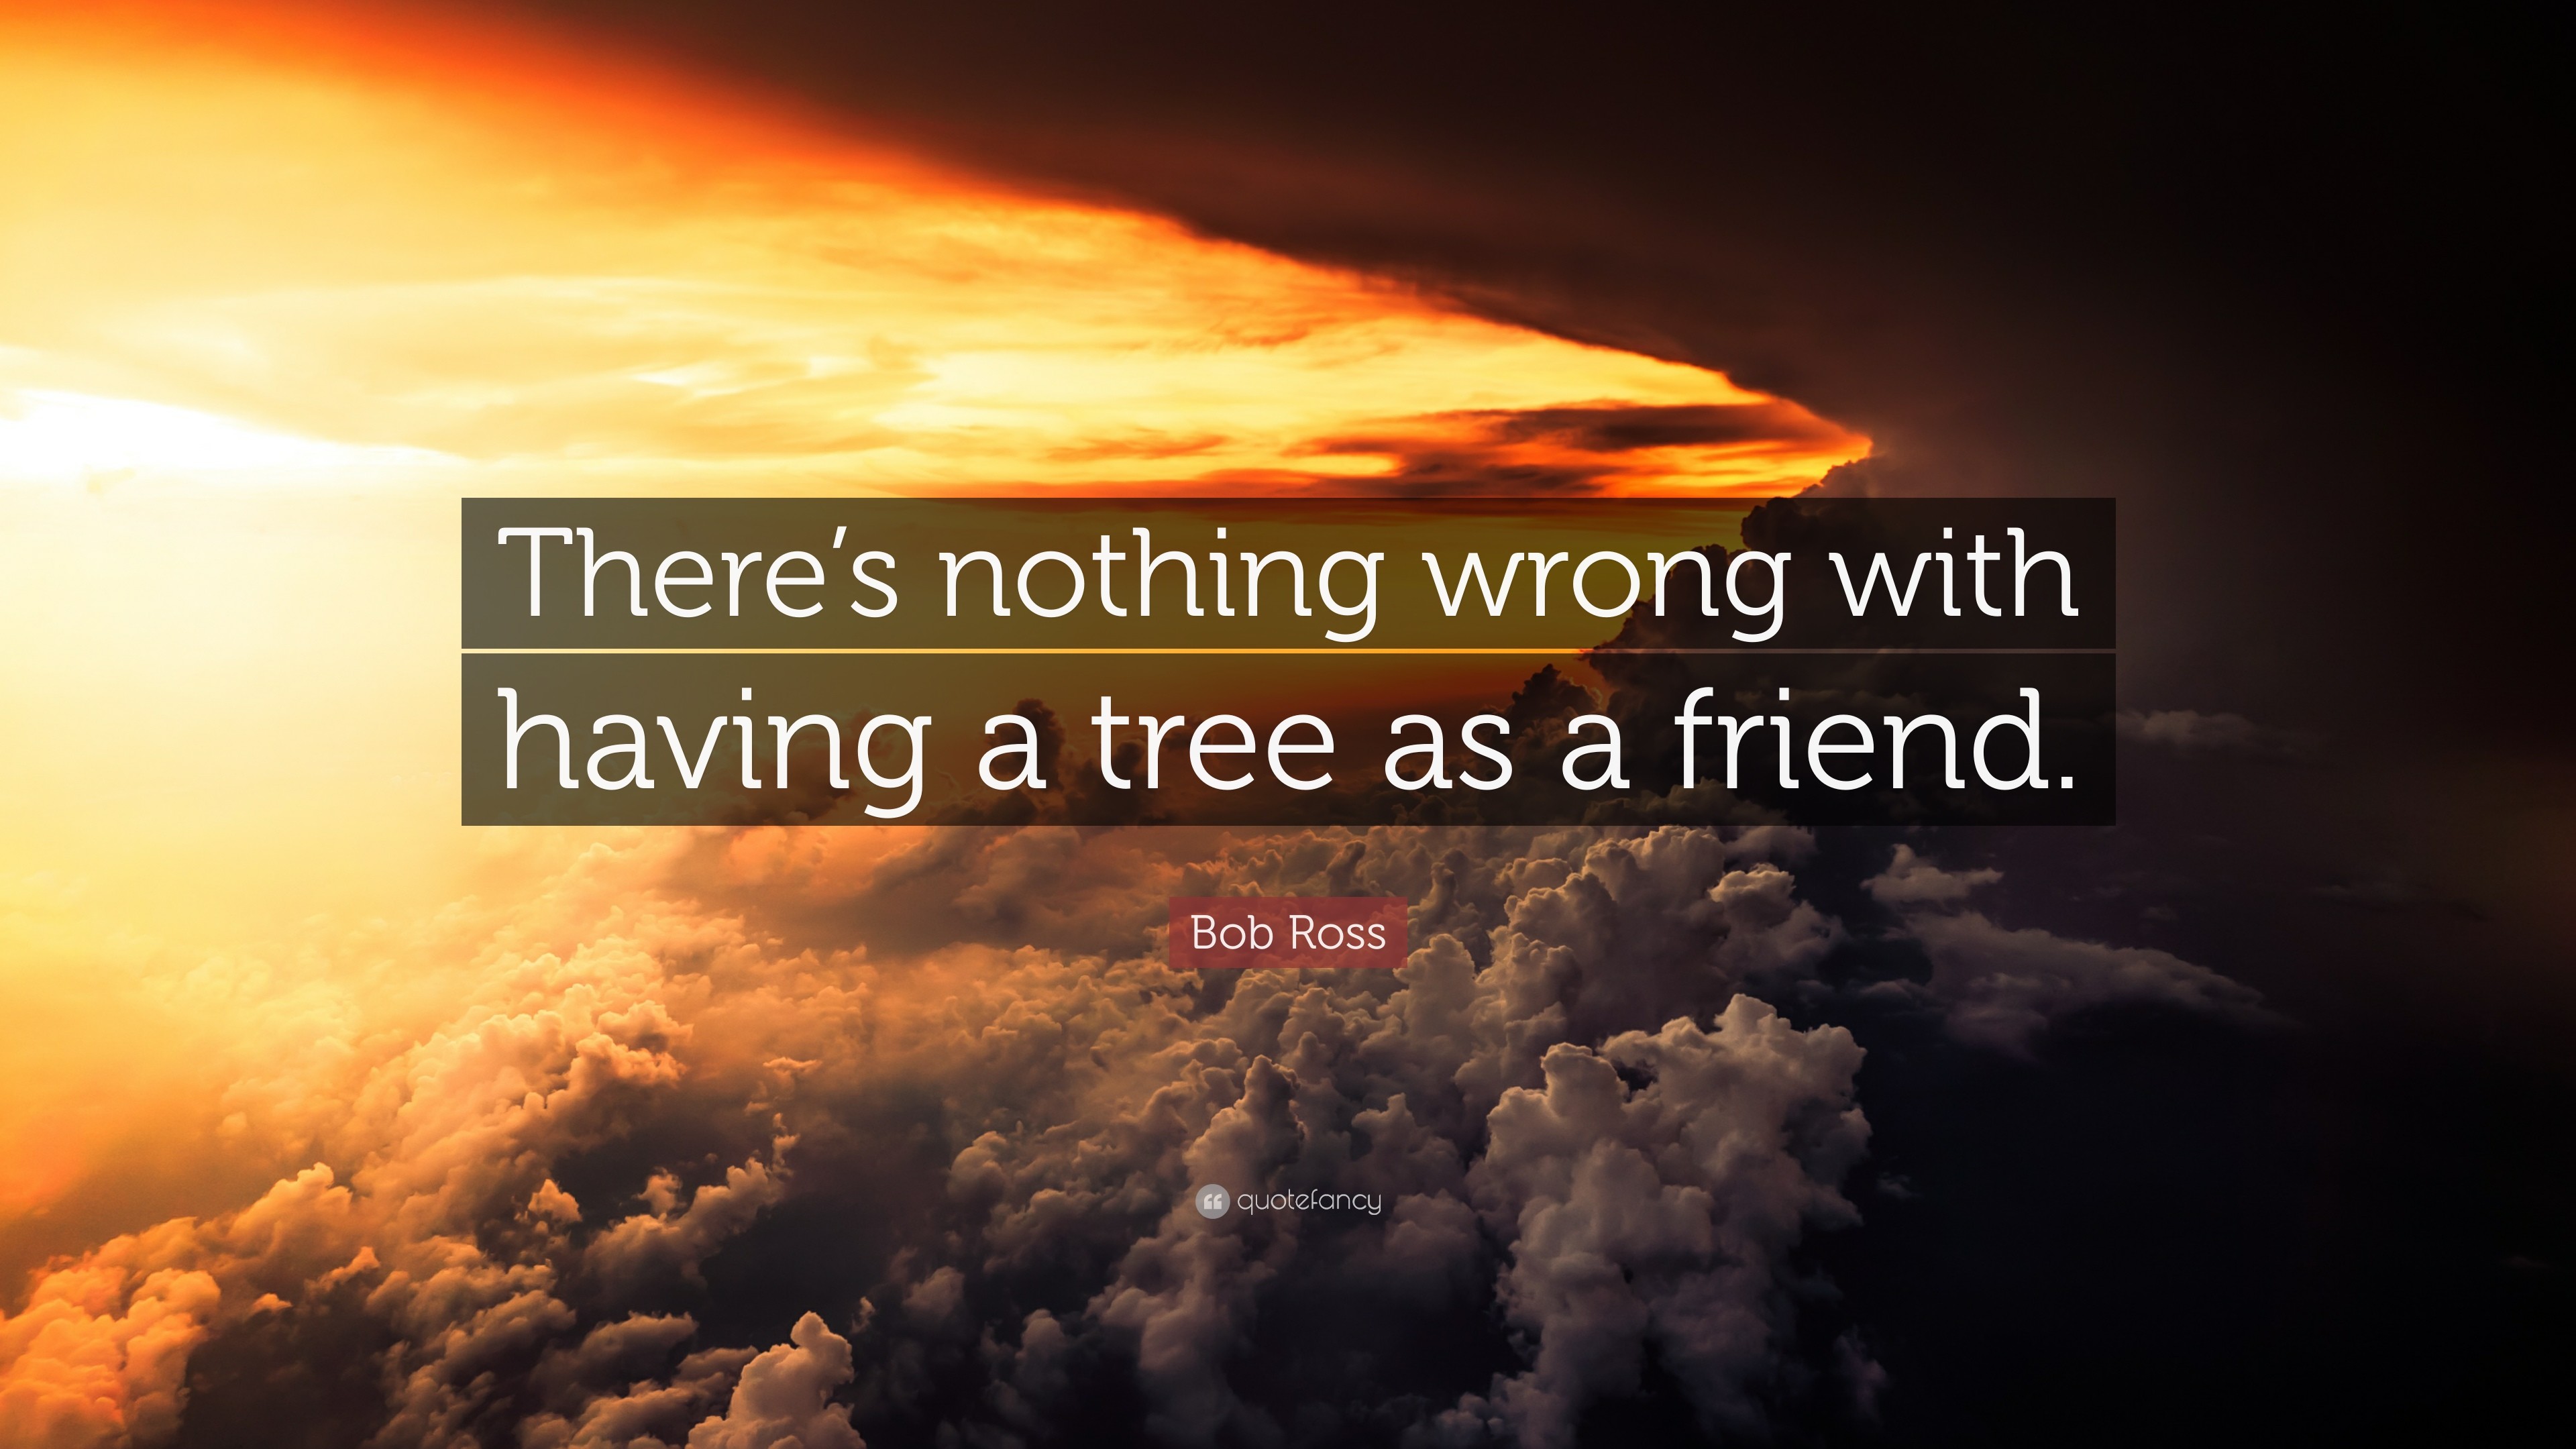 3840x2160 Bob Ross Quote: “There's nothing wrong with having a tree as a friend.